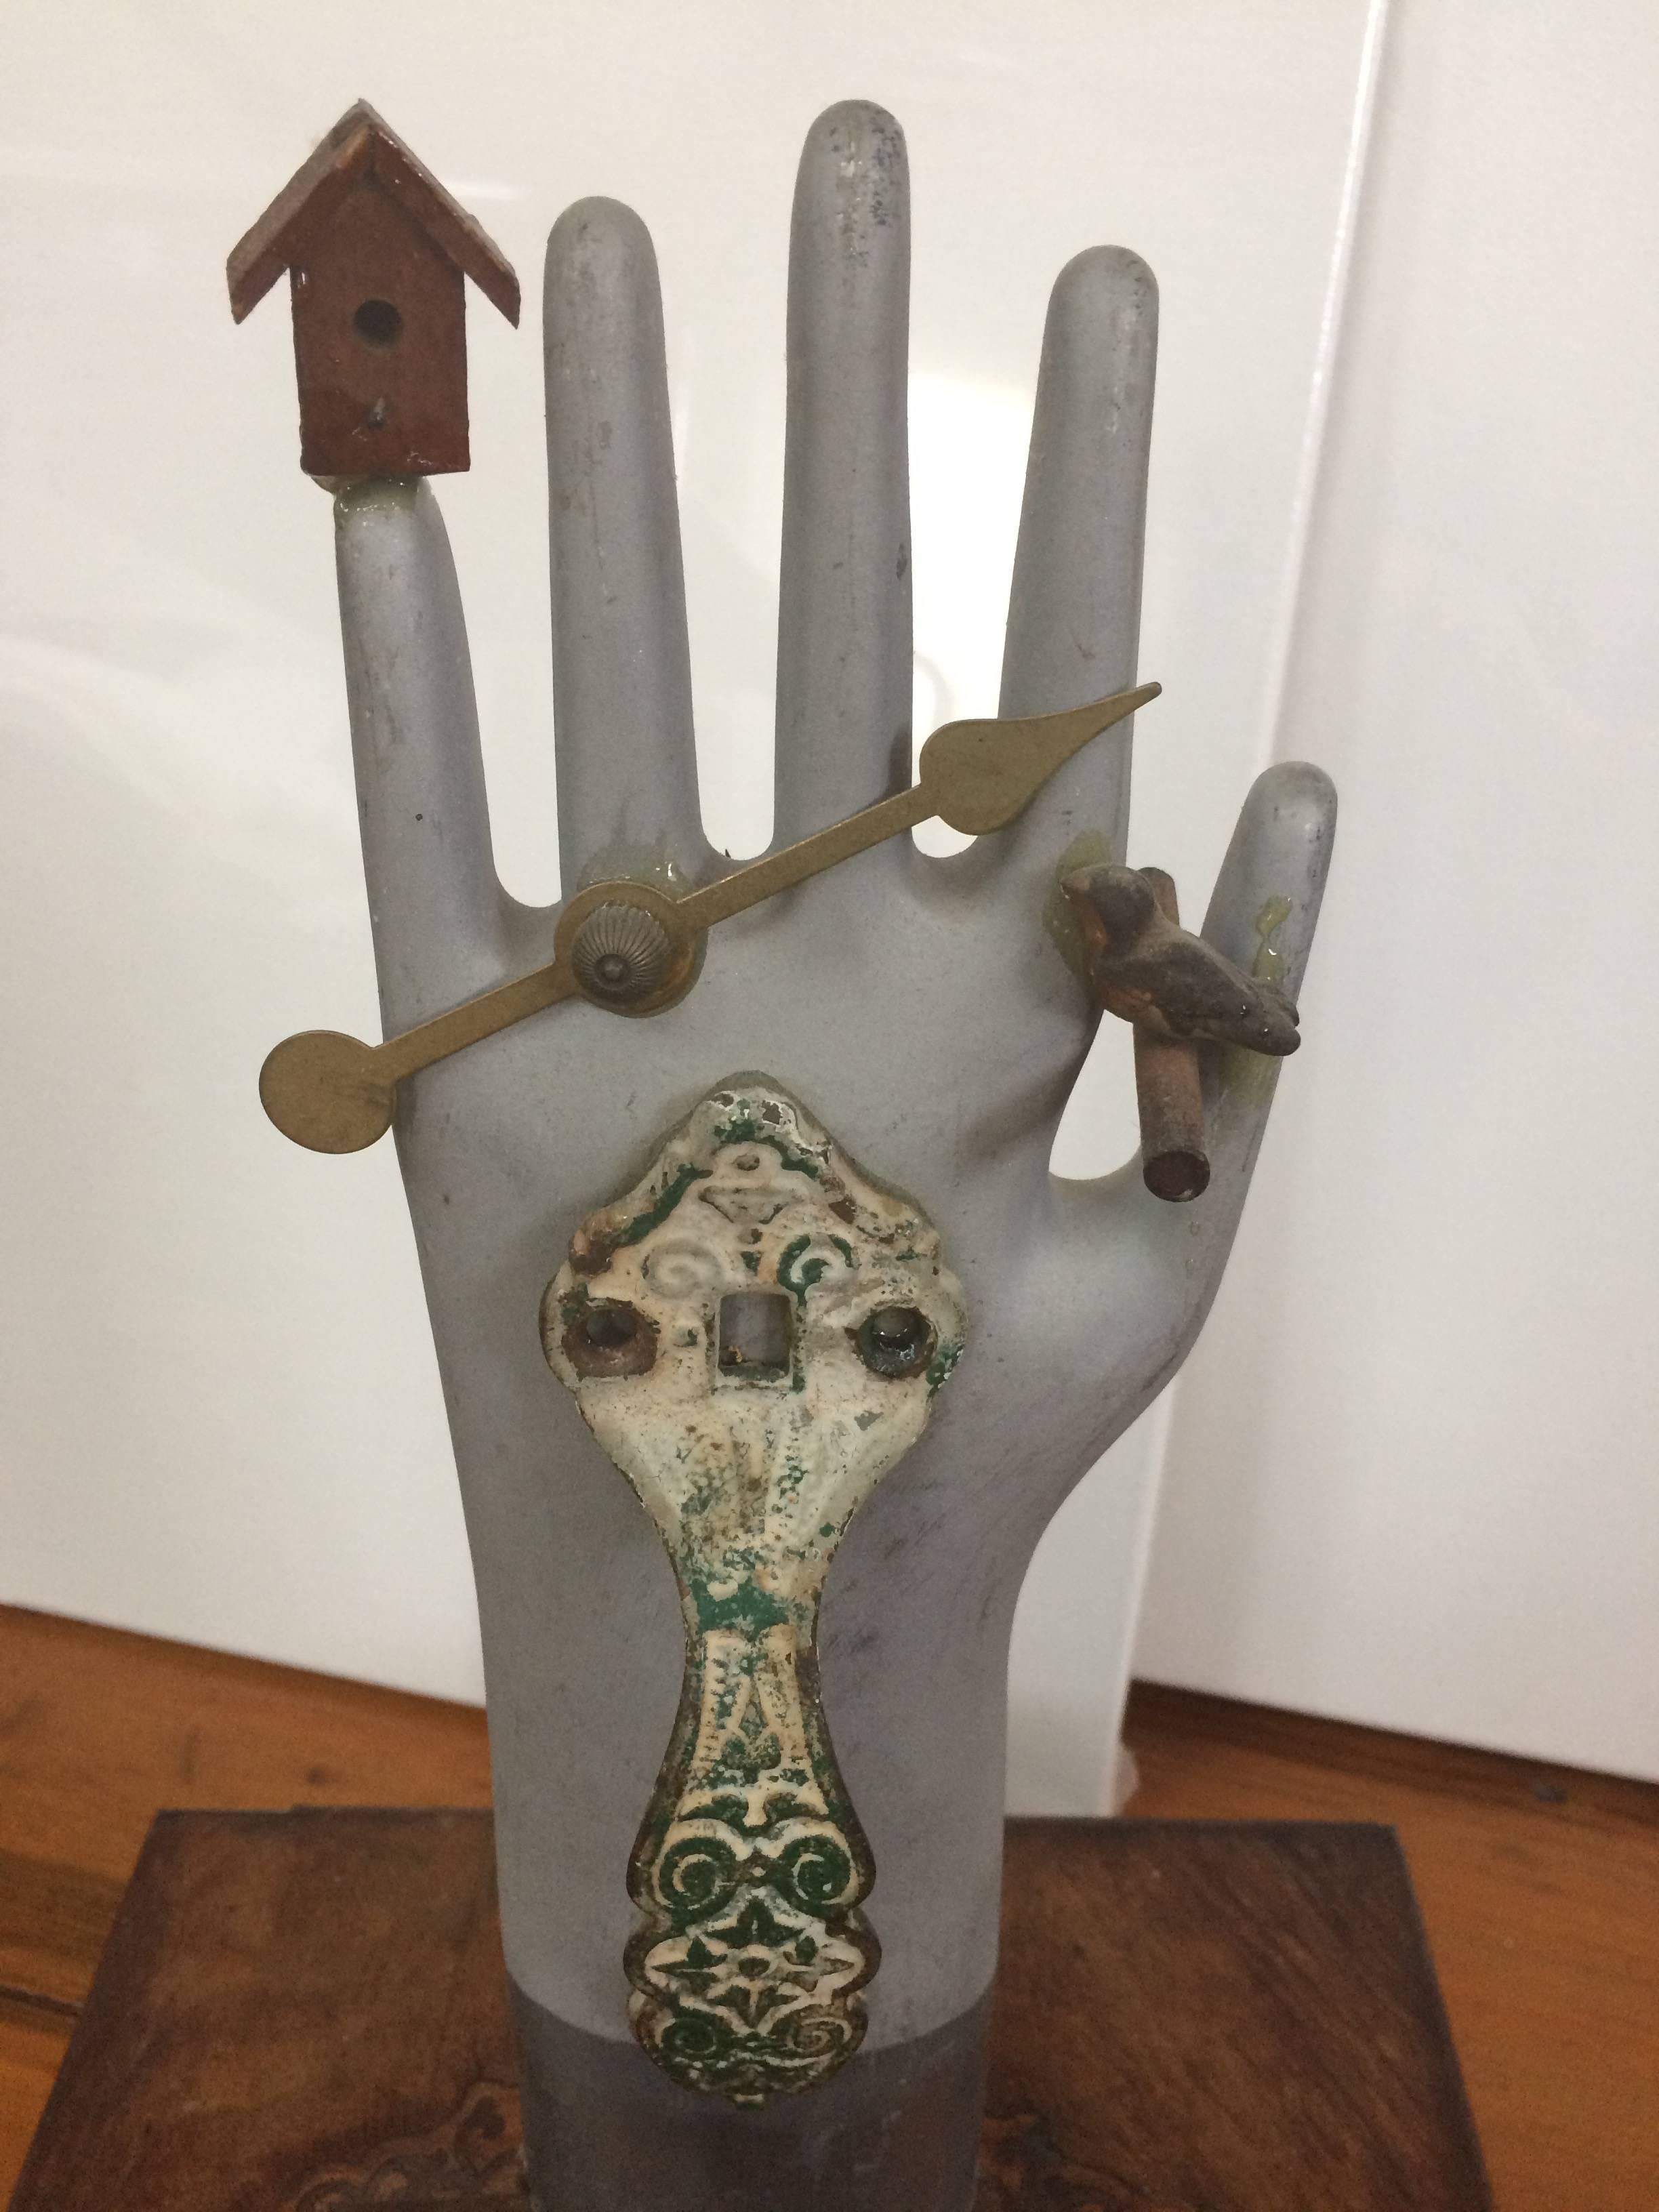 A work of art starting with an antique weathered inlaid wooden box, and becoming an assemblage including a vintage metal glove mold that acts as the means to opening the box, bits and pieces of a deconstructed cuckoo clock, salvaged verdigris